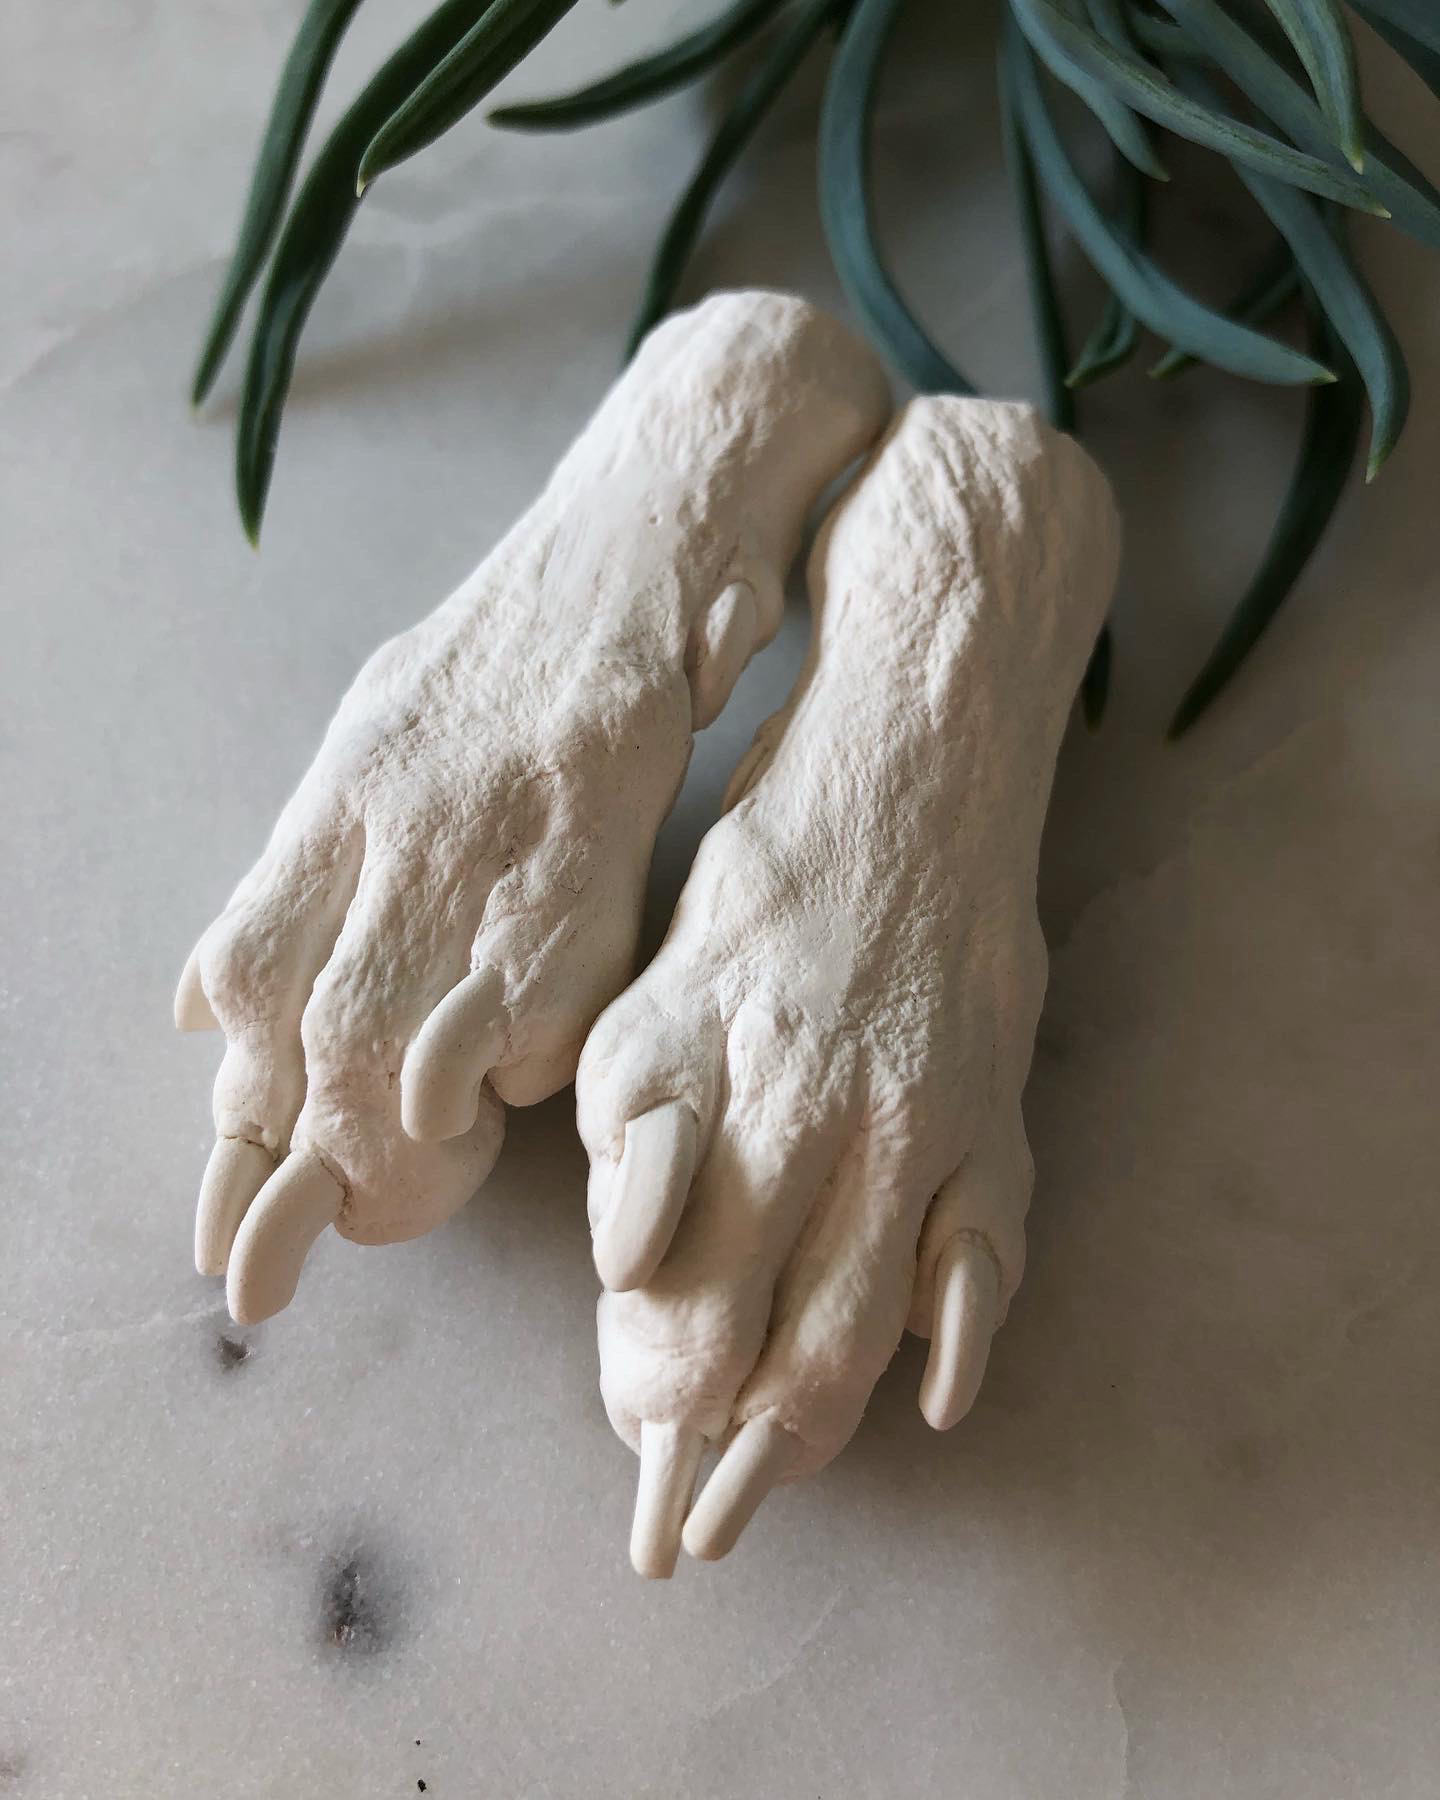 Two preserved dog paws with a plant